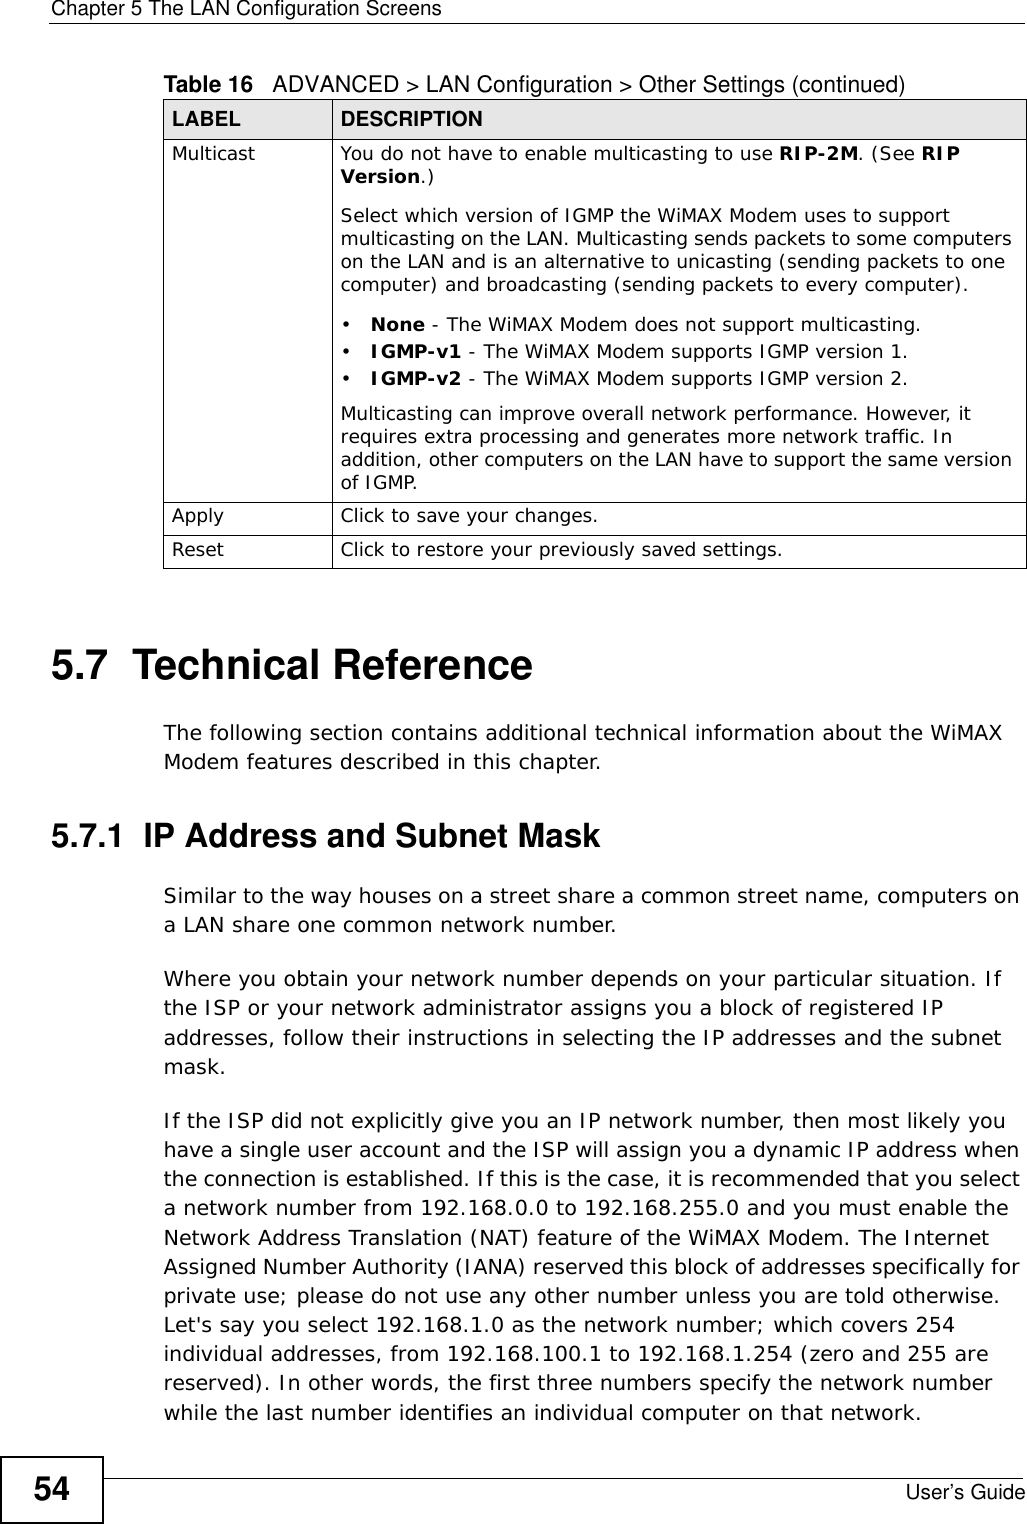 Chapter 5 The LAN Configuration ScreensUser’s Guide545.7  Technical ReferenceThe following section contains additional technical information about the WiMAX Modem features described in this chapter.5.7.1  IP Address and Subnet MaskSimilar to the way houses on a street share a common street name, computers on a LAN share one common network number.Where you obtain your network number depends on your particular situation. If the ISP or your network administrator assigns you a block of registered IP addresses, follow their instructions in selecting the IP addresses and the subnet mask.If the ISP did not explicitly give you an IP network number, then most likely you have a single user account and the ISP will assign you a dynamic IP address when the connection is established. If this is the case, it is recommended that you select a network number from 192.168.0.0 to 192.168.255.0 and you must enable the Network Address Translation (NAT) feature of the WiMAX Modem. The Internet Assigned Number Authority (IANA) reserved this block of addresses specifically for private use; please do not use any other number unless you are told otherwise. Let&apos;s say you select 192.168.1.0 as the network number; which covers 254 individual addresses, from 192.168.100.1 to 192.168.1.254 (zero and 255 are reserved). In other words, the first three numbers specify the network number while the last number identifies an individual computer on that network.Multicast You do not have to enable multicasting to use RIP-2M. (See RIP Version.)Select which version of IGMP the WiMAX Modem uses to support multicasting on the LAN. Multicasting sends packets to some computers on the LAN and is an alternative to unicasting (sending packets to one computer) and broadcasting (sending packets to every computer).•None - The WiMAX Modem does not support multicasting.•IGMP-v1 - The WiMAX Modem supports IGMP version 1.•IGMP-v2 - The WiMAX Modem supports IGMP version 2.Multicasting can improve overall network performance. However, it requires extra processing and generates more network traffic. In addition, other computers on the LAN have to support the same version of IGMP.Apply Click to save your changes.Reset Click to restore your previously saved settings.Table 16   ADVANCED &gt; LAN Configuration &gt; Other Settings (continued)LABEL DESCRIPTION